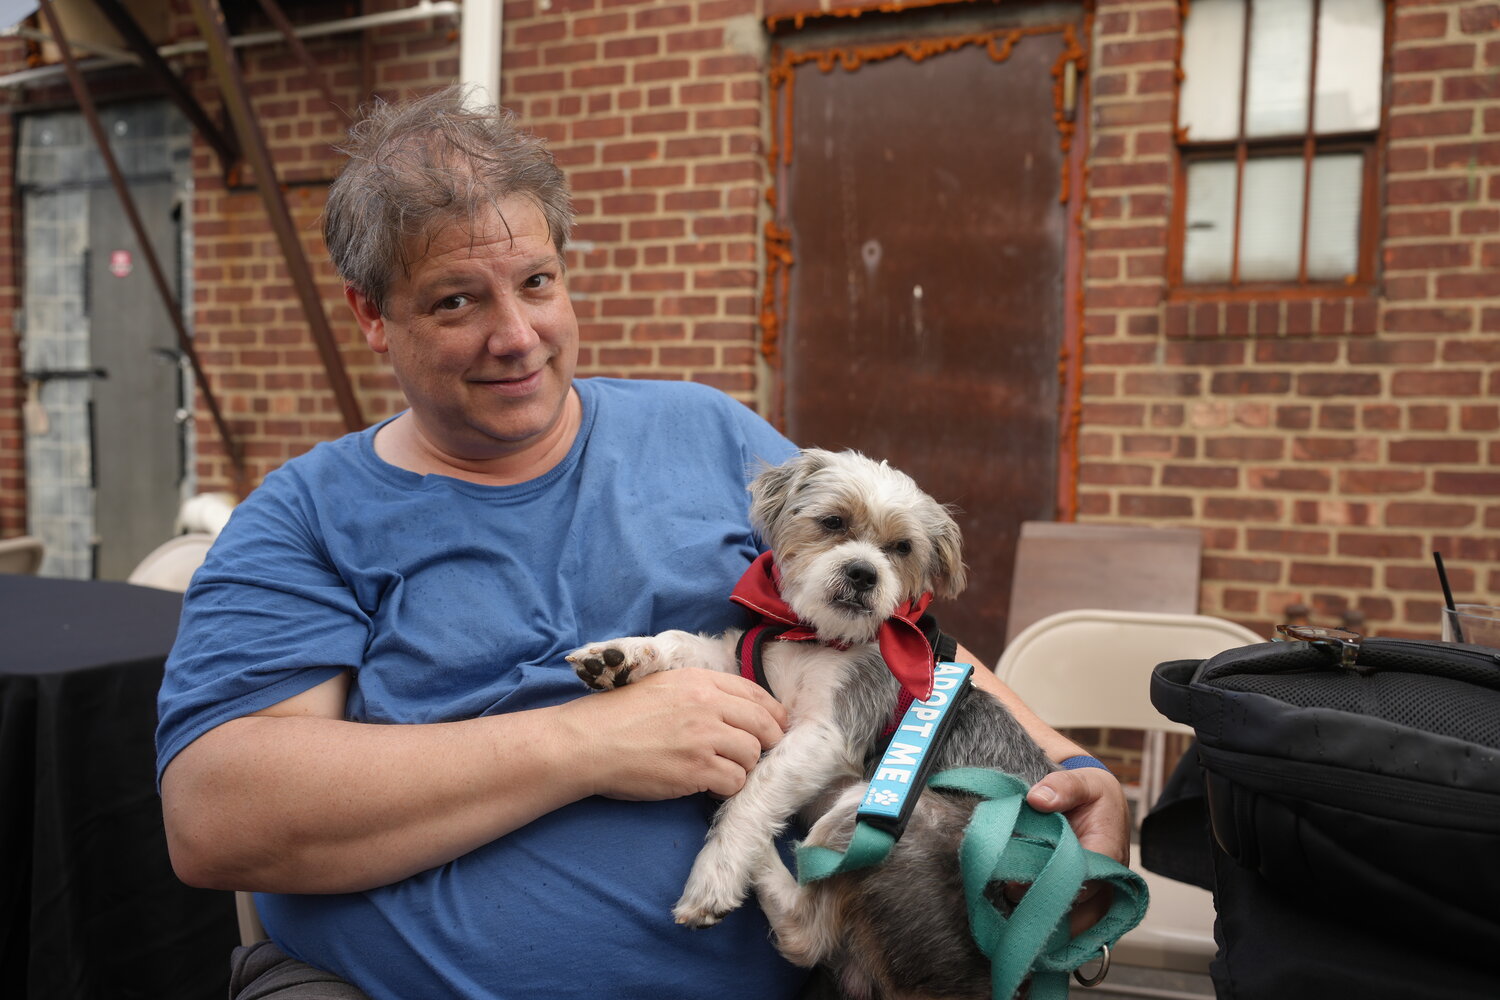 Keith Schneider met and played with pup, Tiny. Heavenly Angels is a foster-based rescue, with a P.O. Box in Ozone Park. All dogs are evaluated and socialized before adoption.